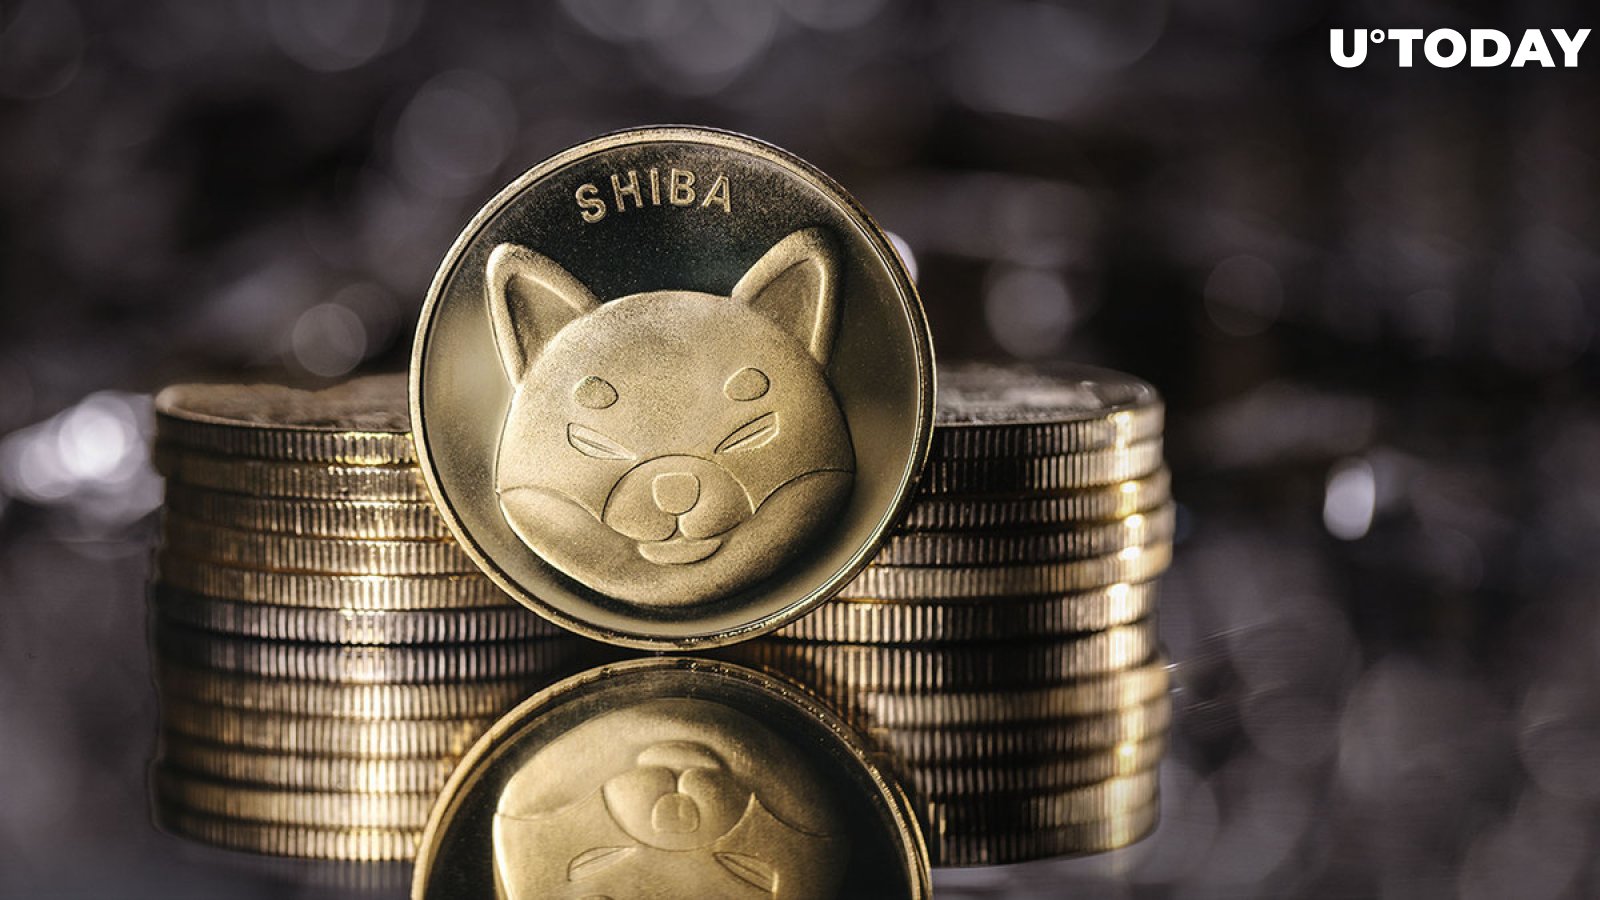 Around $1 Billion Shiba Inu (SHIB) Moved in One Day, But What's Really Behind Those Transactions?